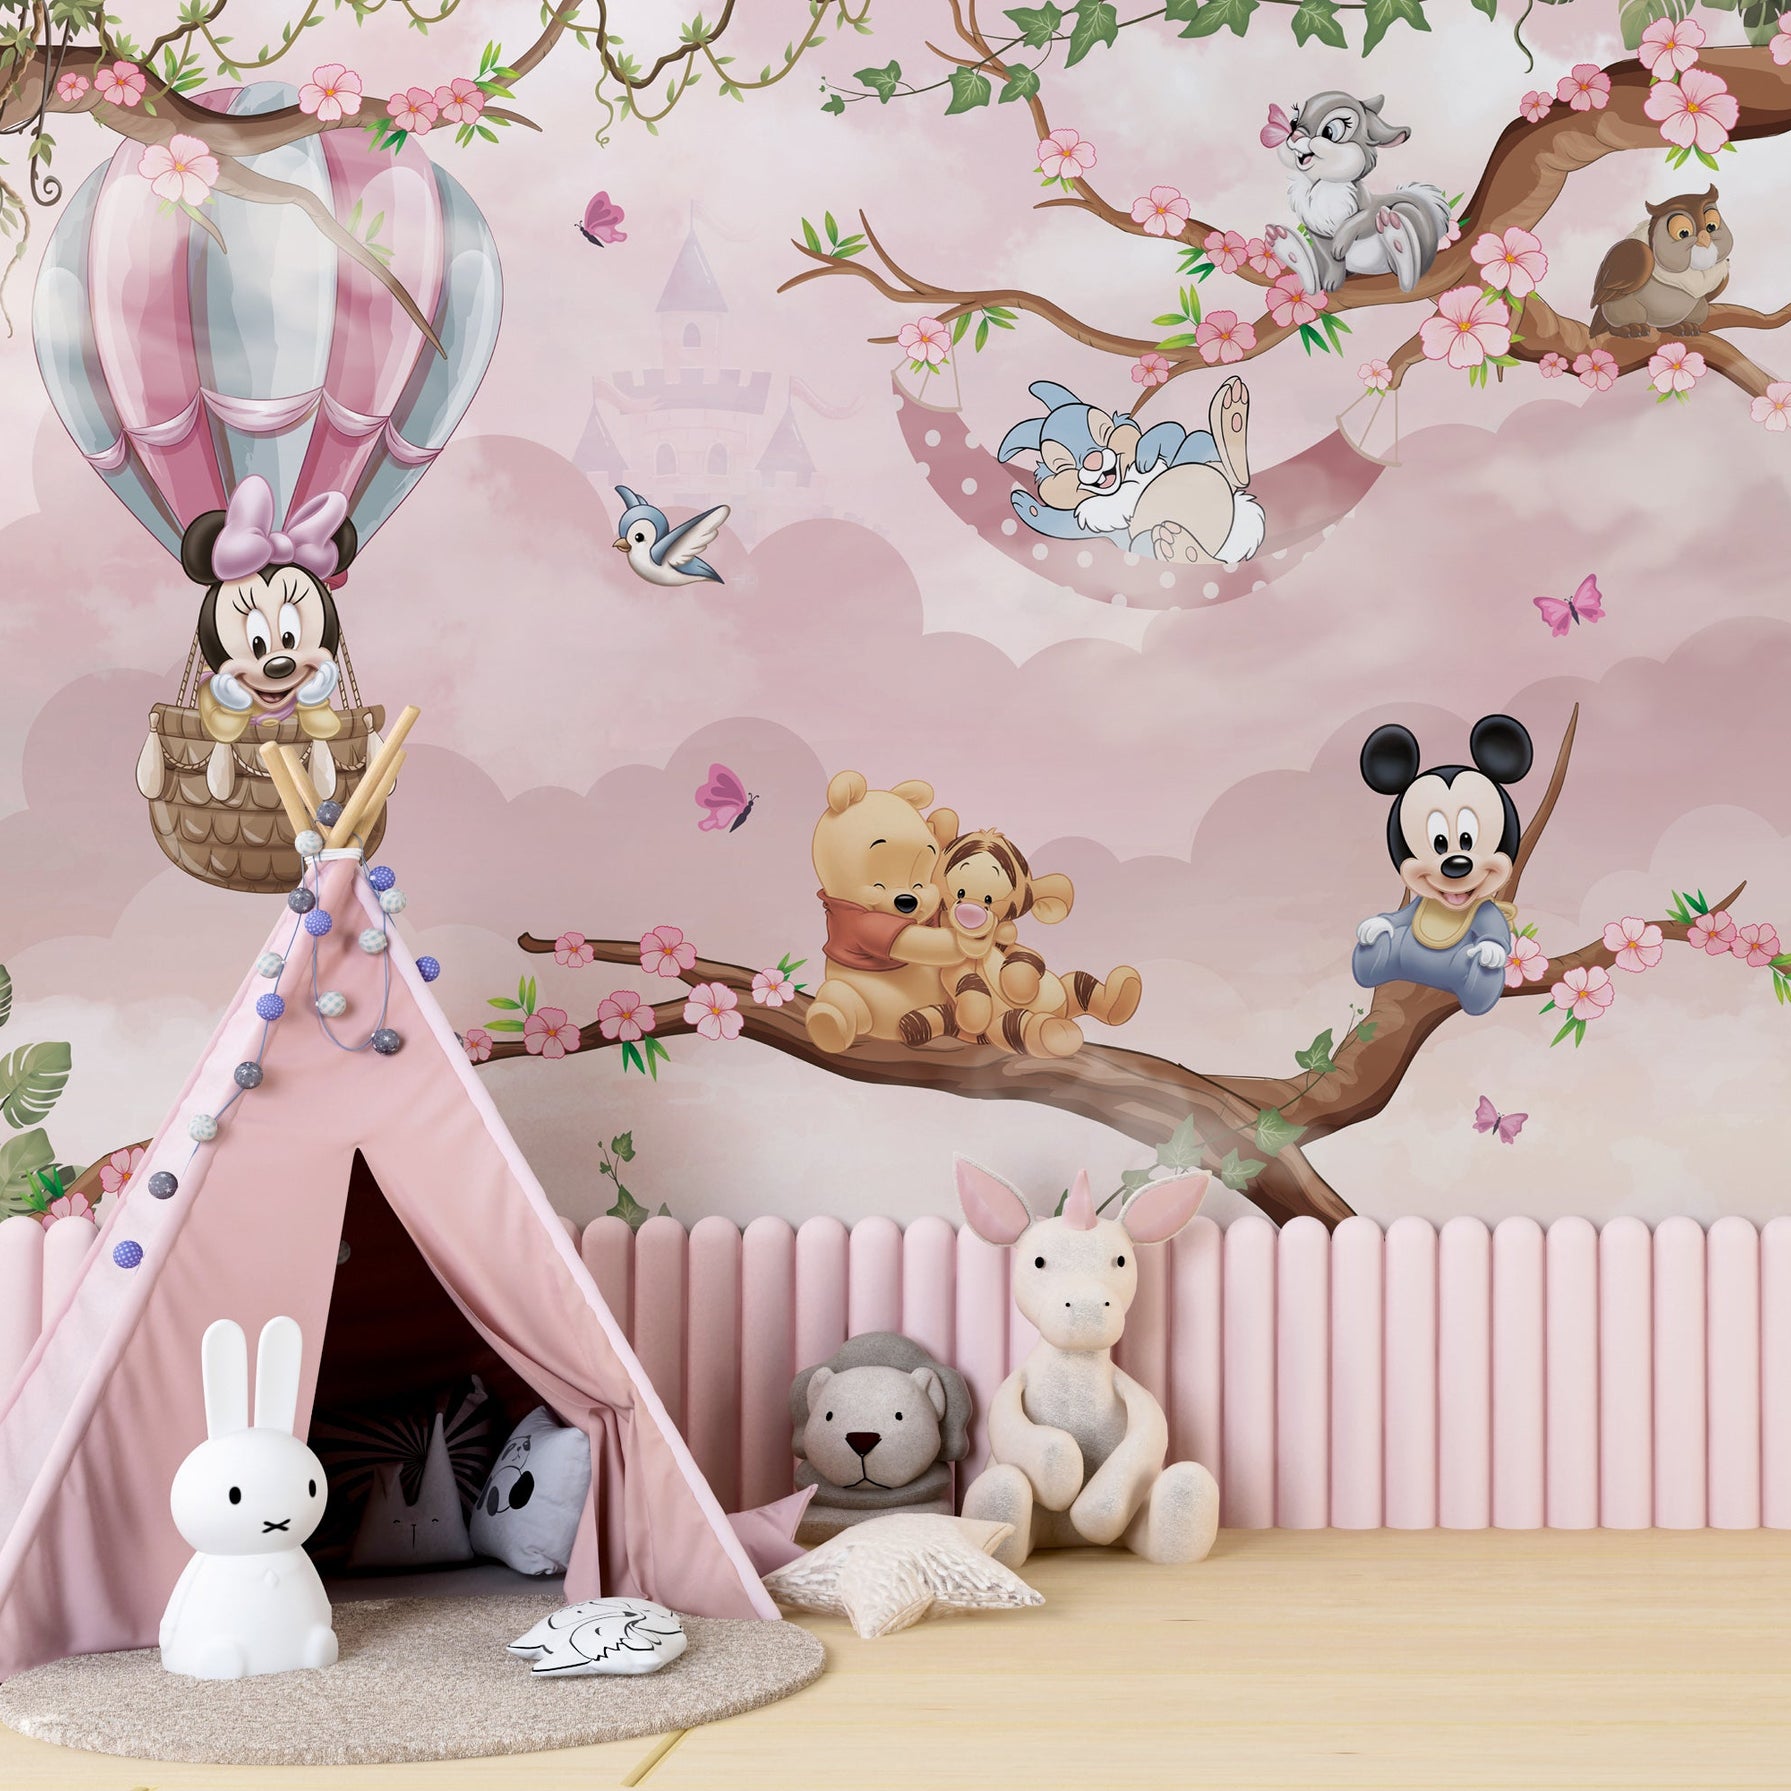 Minnie and Honeypoo Wallpaper Mural: Transform Your Space